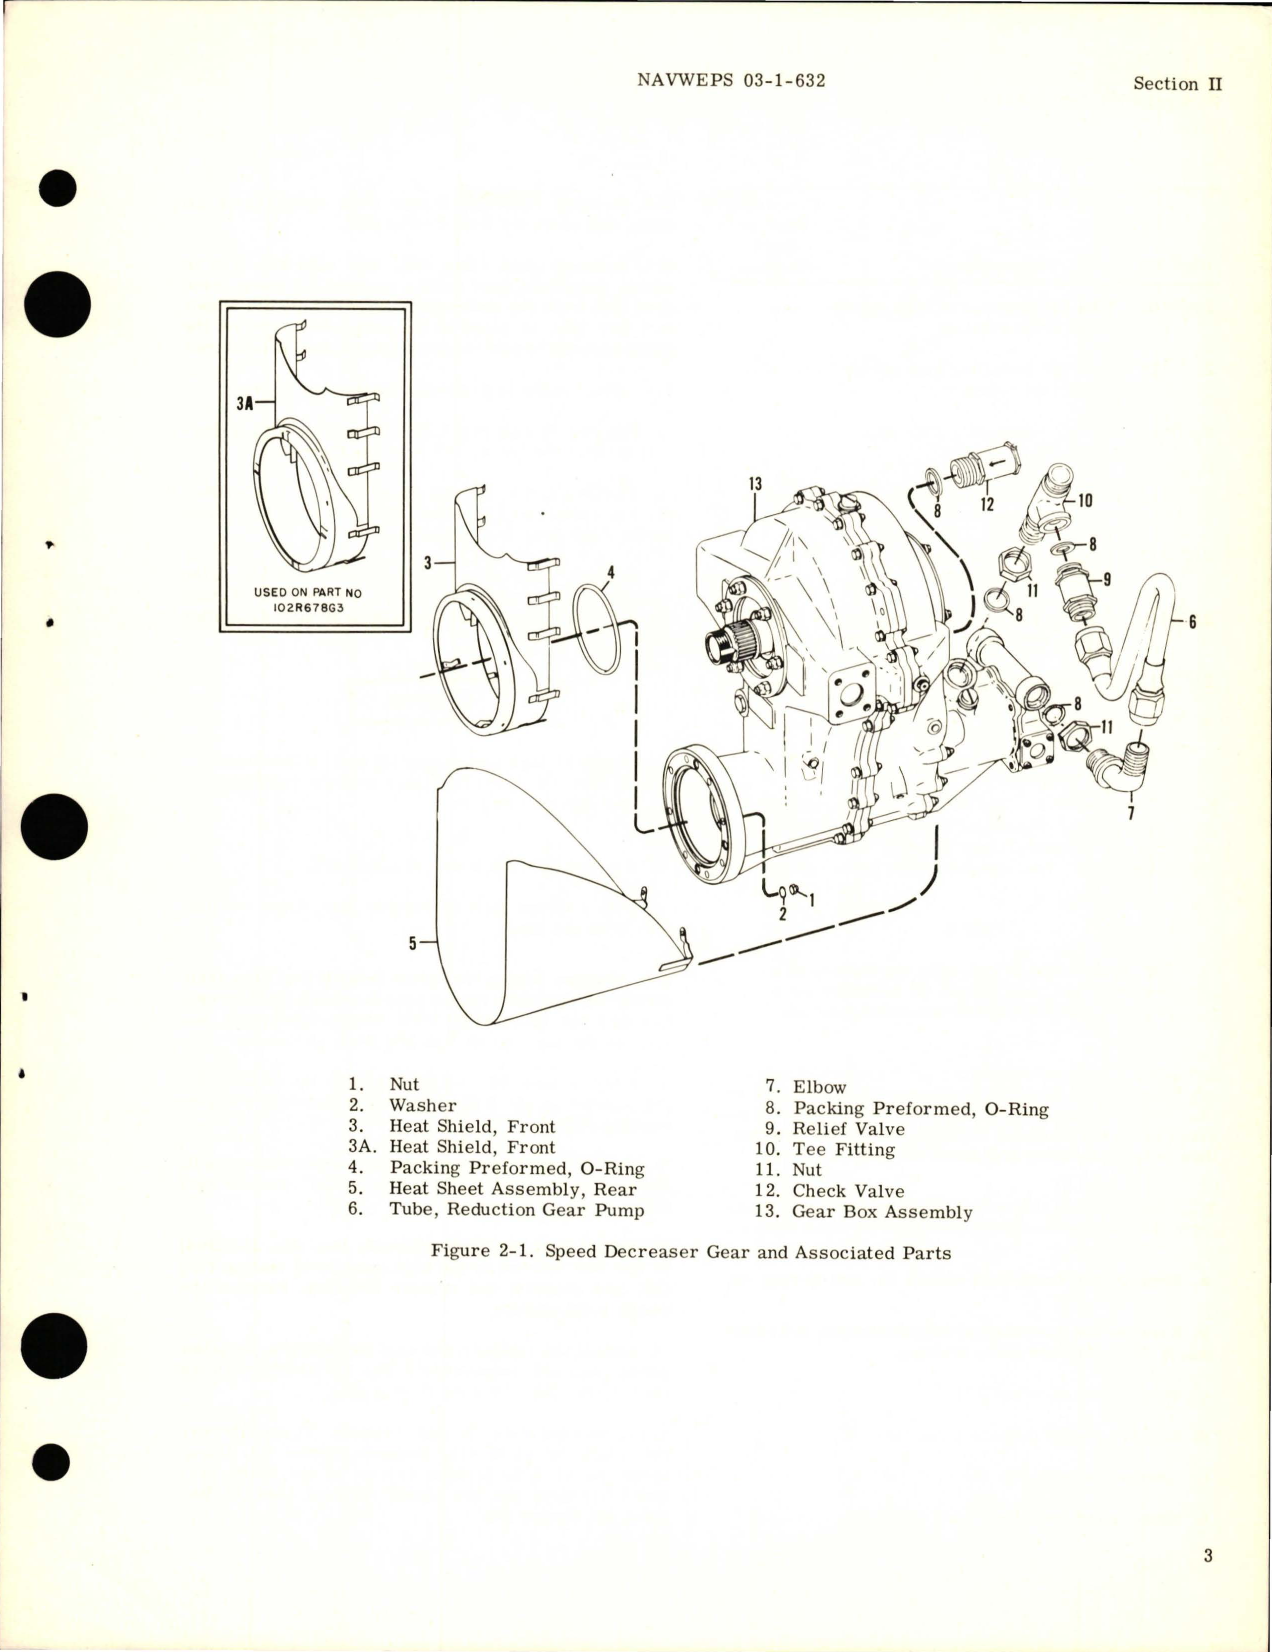 Sample page 7 from AirCorps Library document: Overhaul Instructions for Speed Decreaser Gear and Associated Parts - Parts 102R679G3, 102R678G3, and 102R678G6 for T-58 Engine 